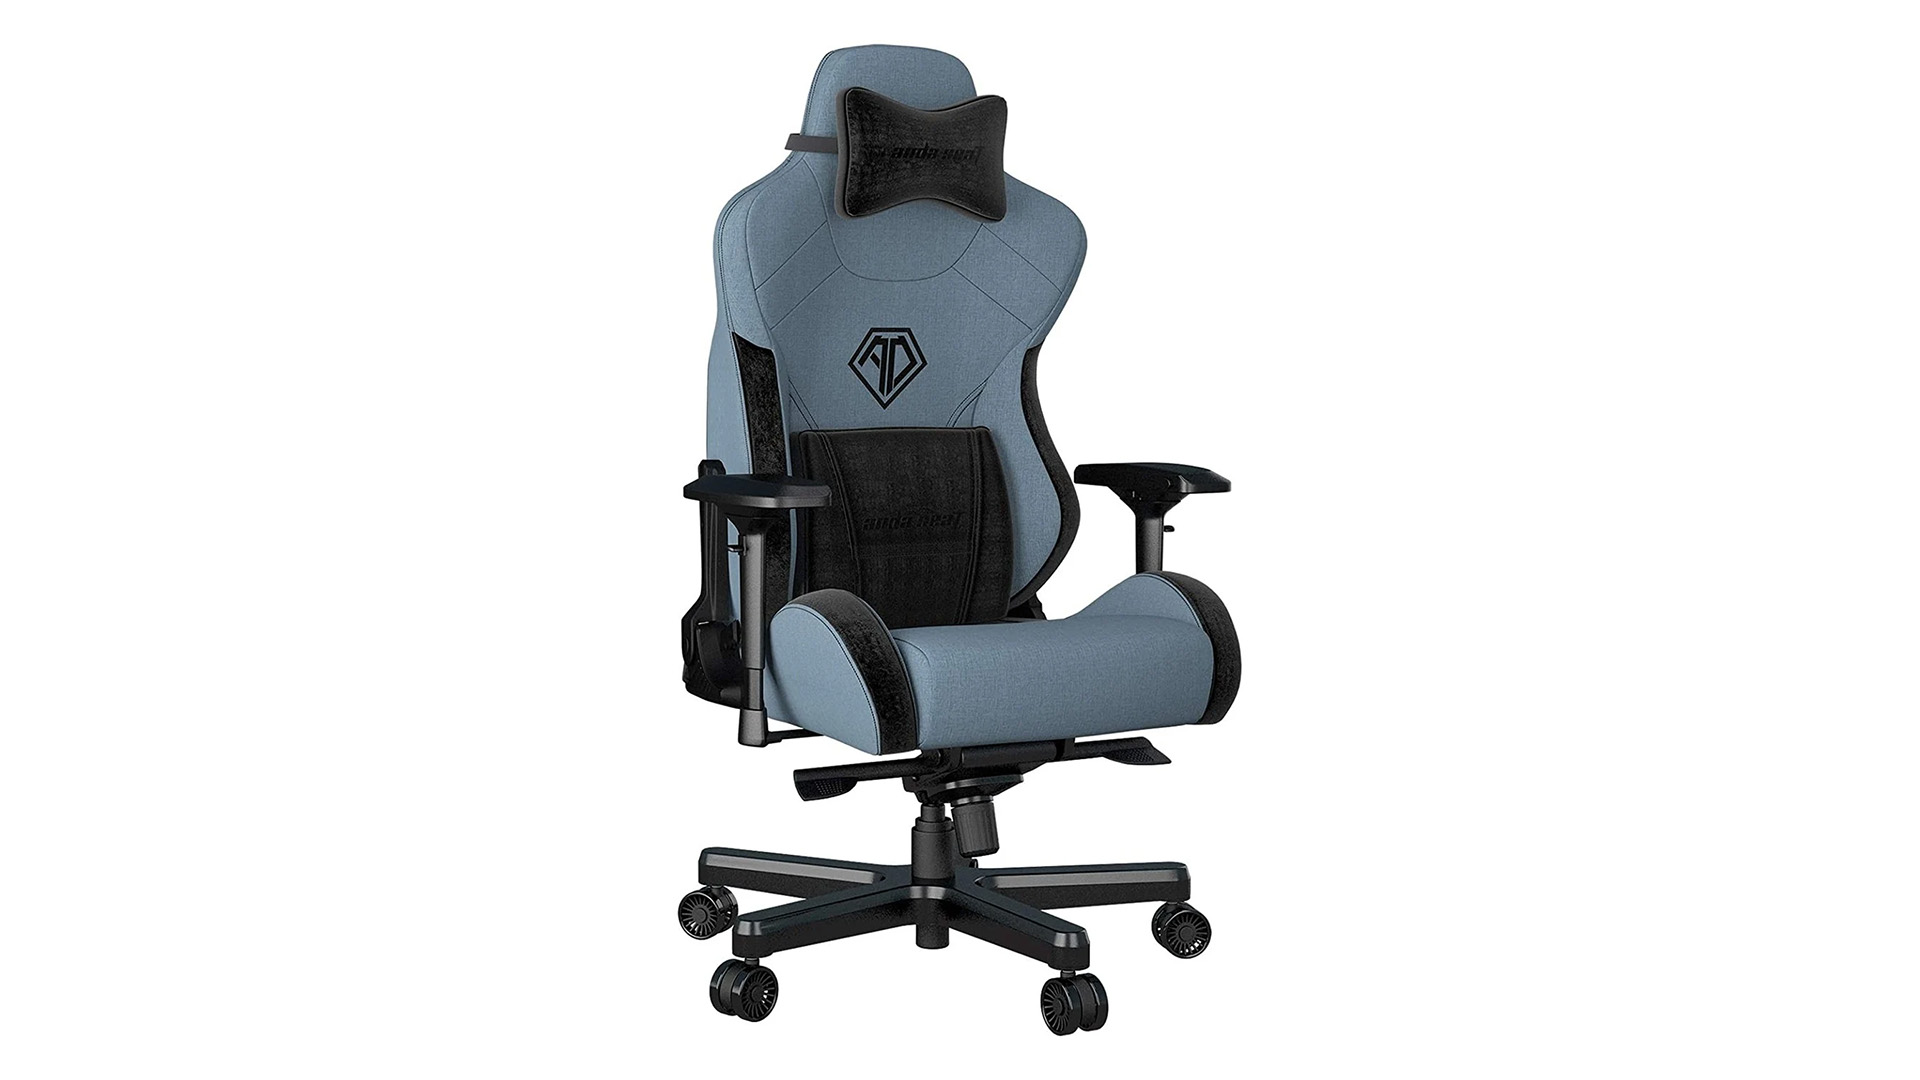 Anda Seat T-Pro 2 at an angle on a white background